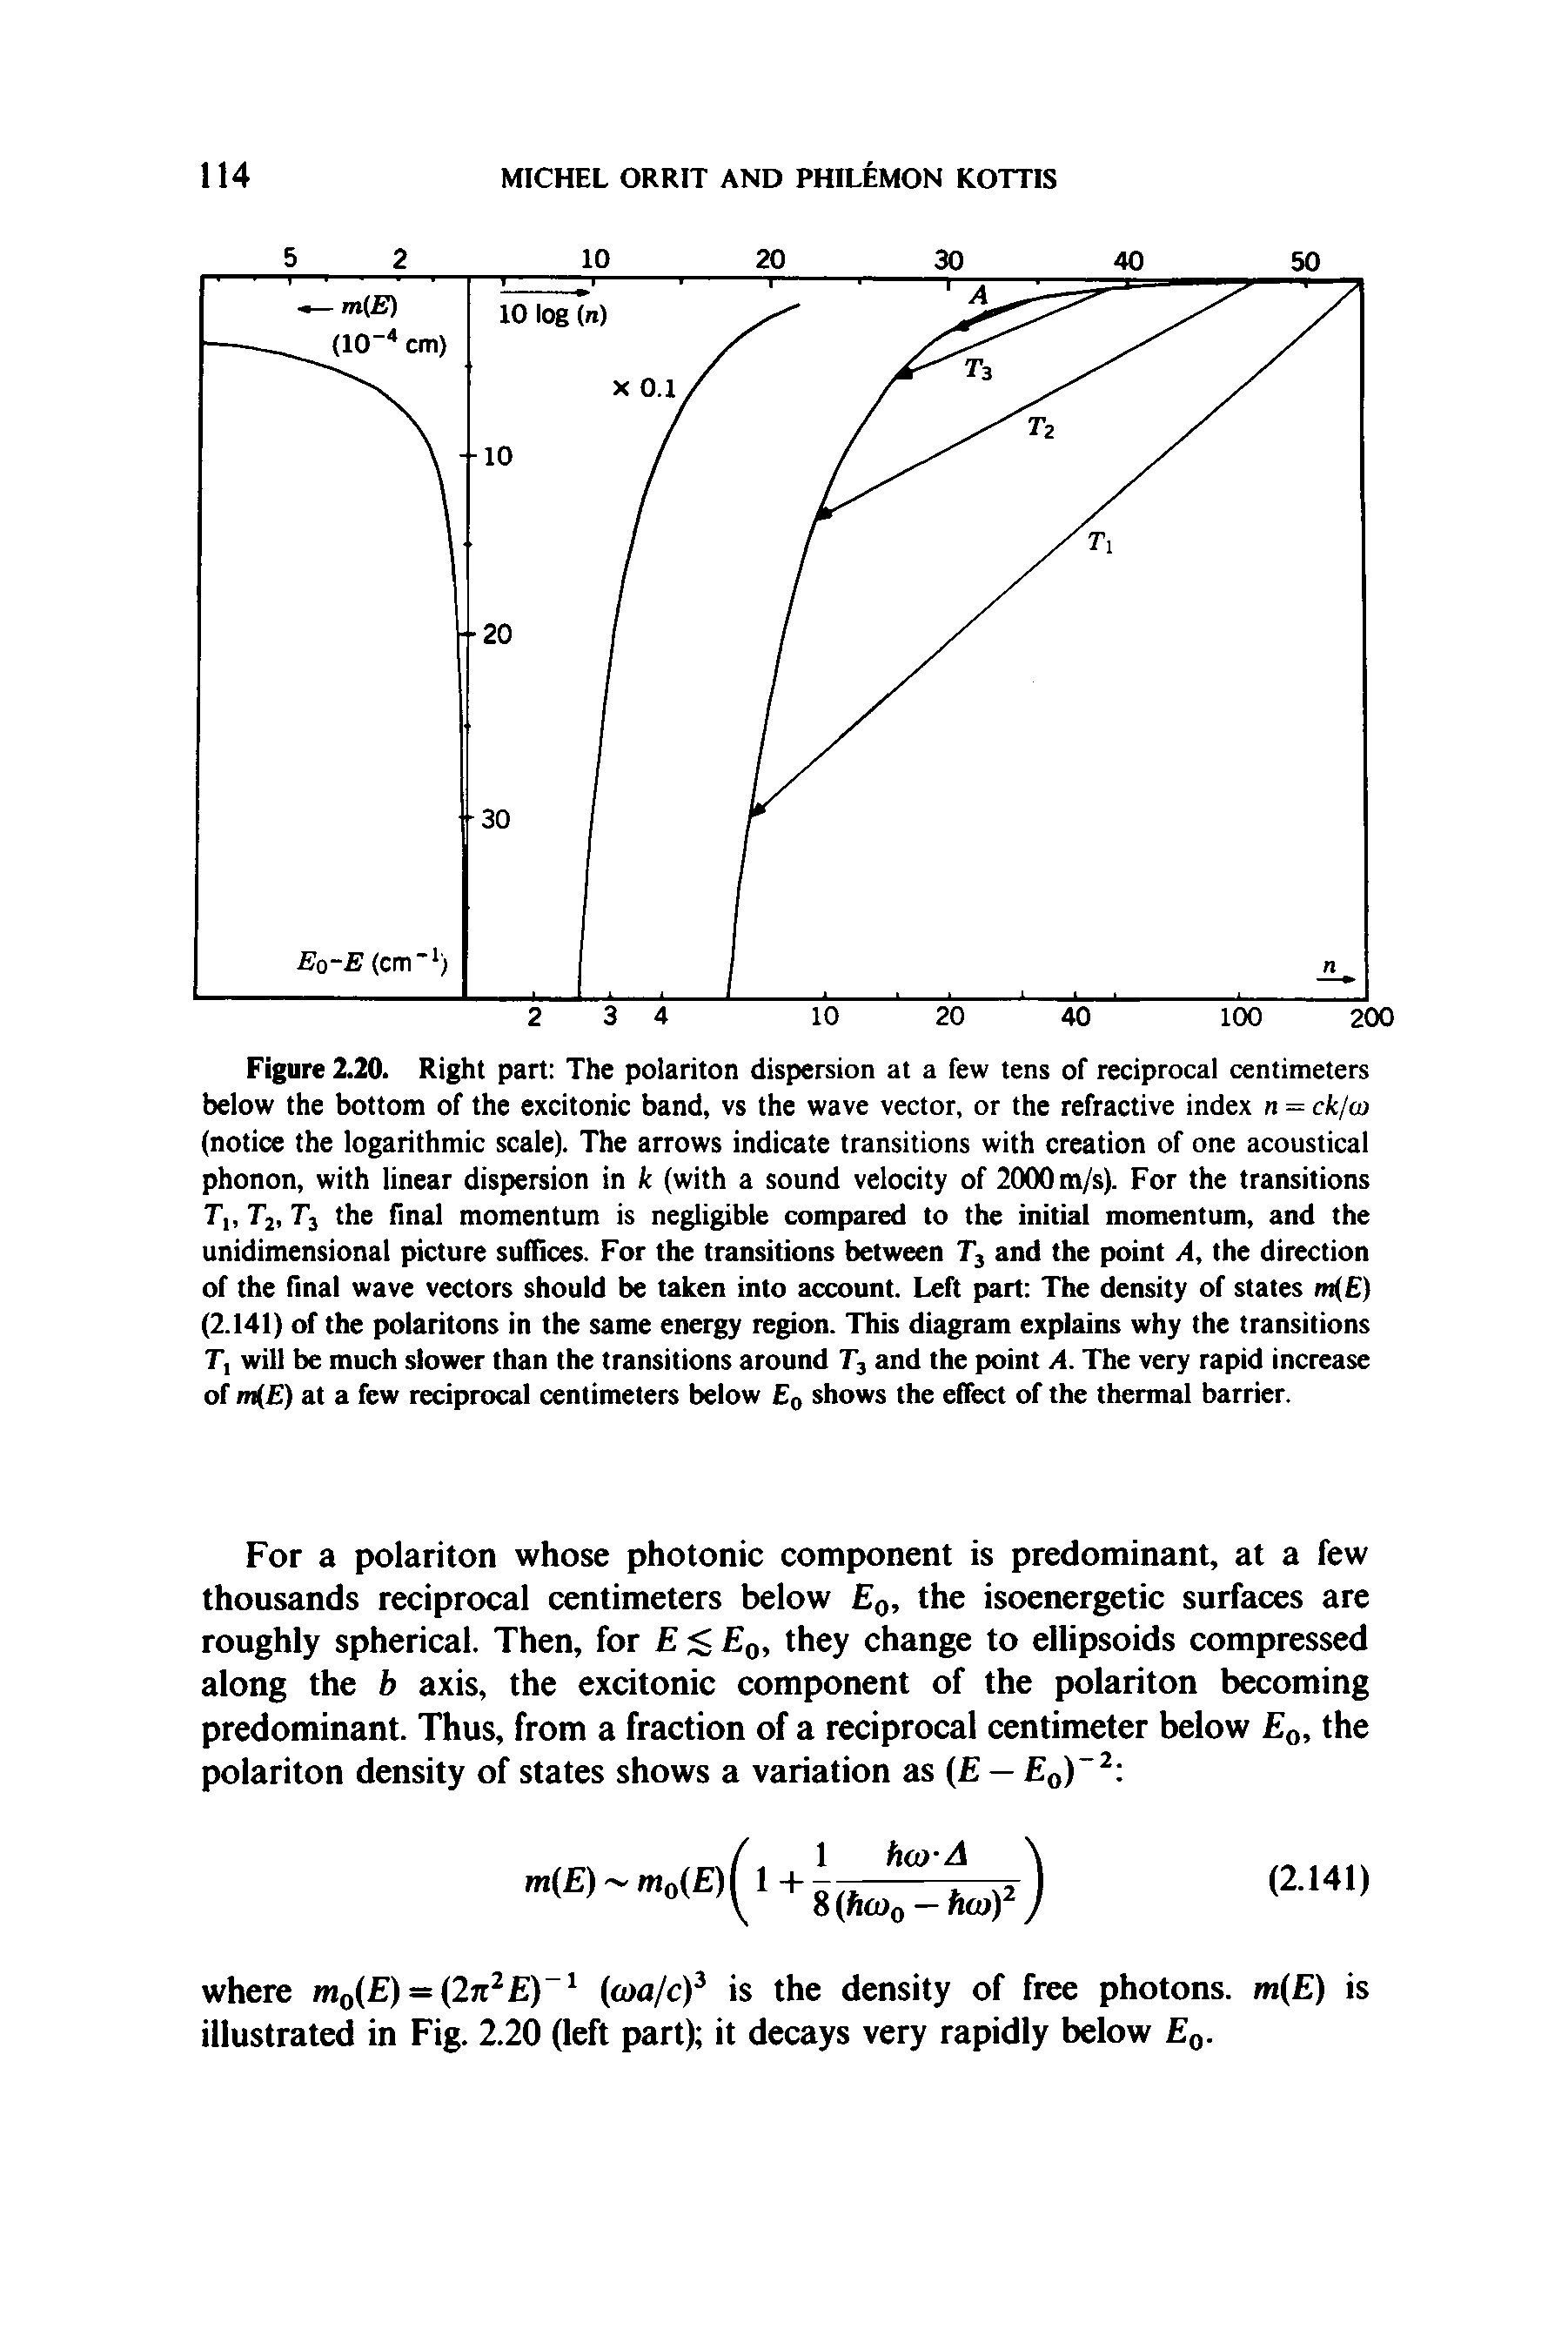 Figure 2.20. Right part The polariton dispersion at a few tens of reciprocal centimeters below the bottom of the excitonic band, vs the wave vector, or the refractive index n = ck/w (notice the logarithmic scale). The arrows indicate transitions with creation of one acoustical phonon, with linear dispersion in k (with a sound velocity of 2000 m/s). For the transitions T, Tt, T3 the final momentum is negligible compared to the initial momentum, and the unidimensional picture suffices. For the transitions between T3 and the point A, the direction of the final wave vectors should be taken into account. Left part The density of states m( ) (2.141) of the polaritons in the same energy region. This diagram explains why the transitions T, will be much slower than the transitions around T3 and the point A. The very rapid increase of m( ) at a few reciprocal centimeters below E0 shows the effect of the thermal barrier.